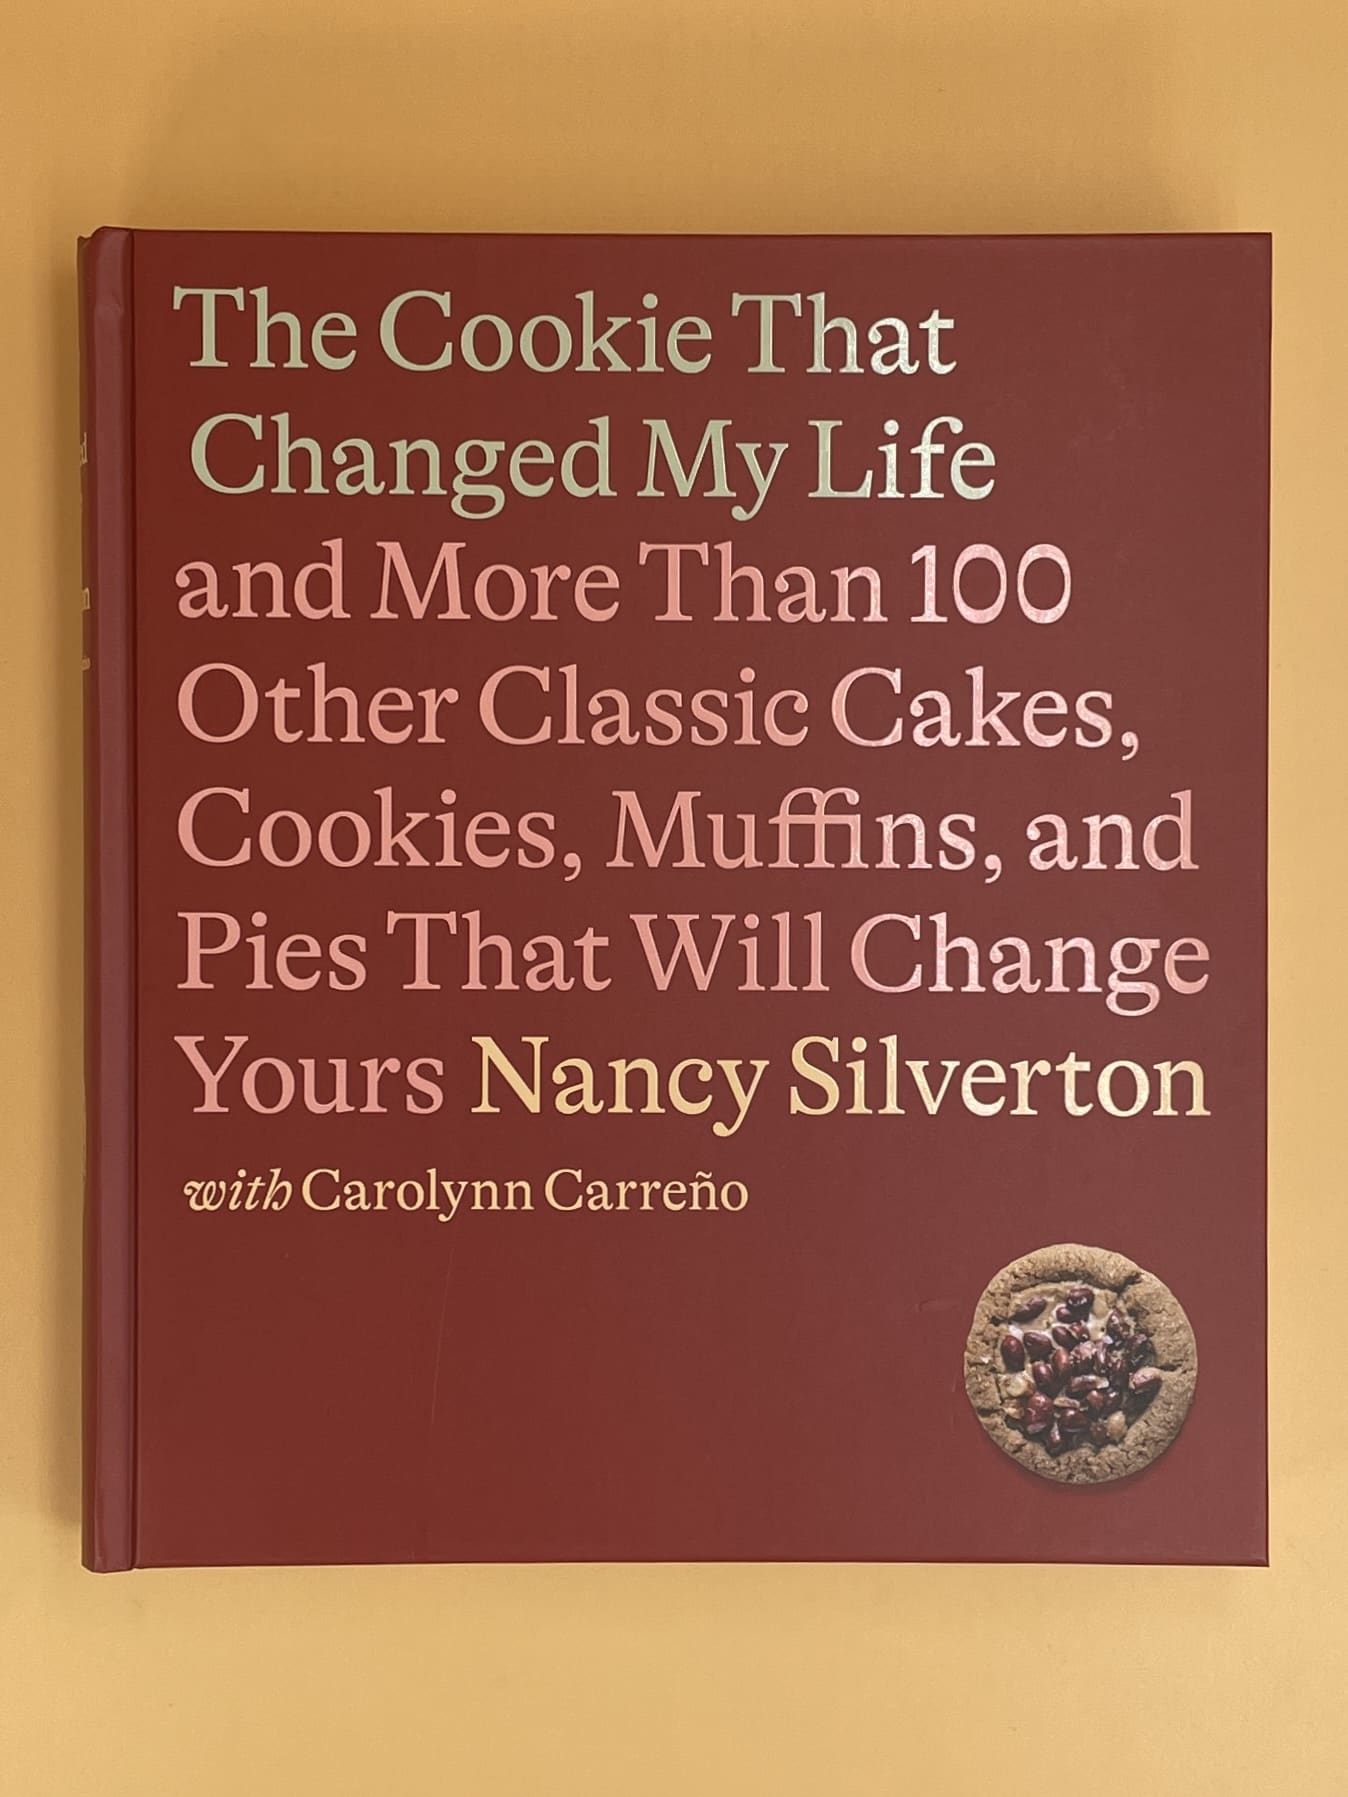 The Cookie That Changed My Life: And More Than 100 Other Classic Cakes, Cookies, Muffins, and Pies That Will Change Yours (Nancy Silverton)